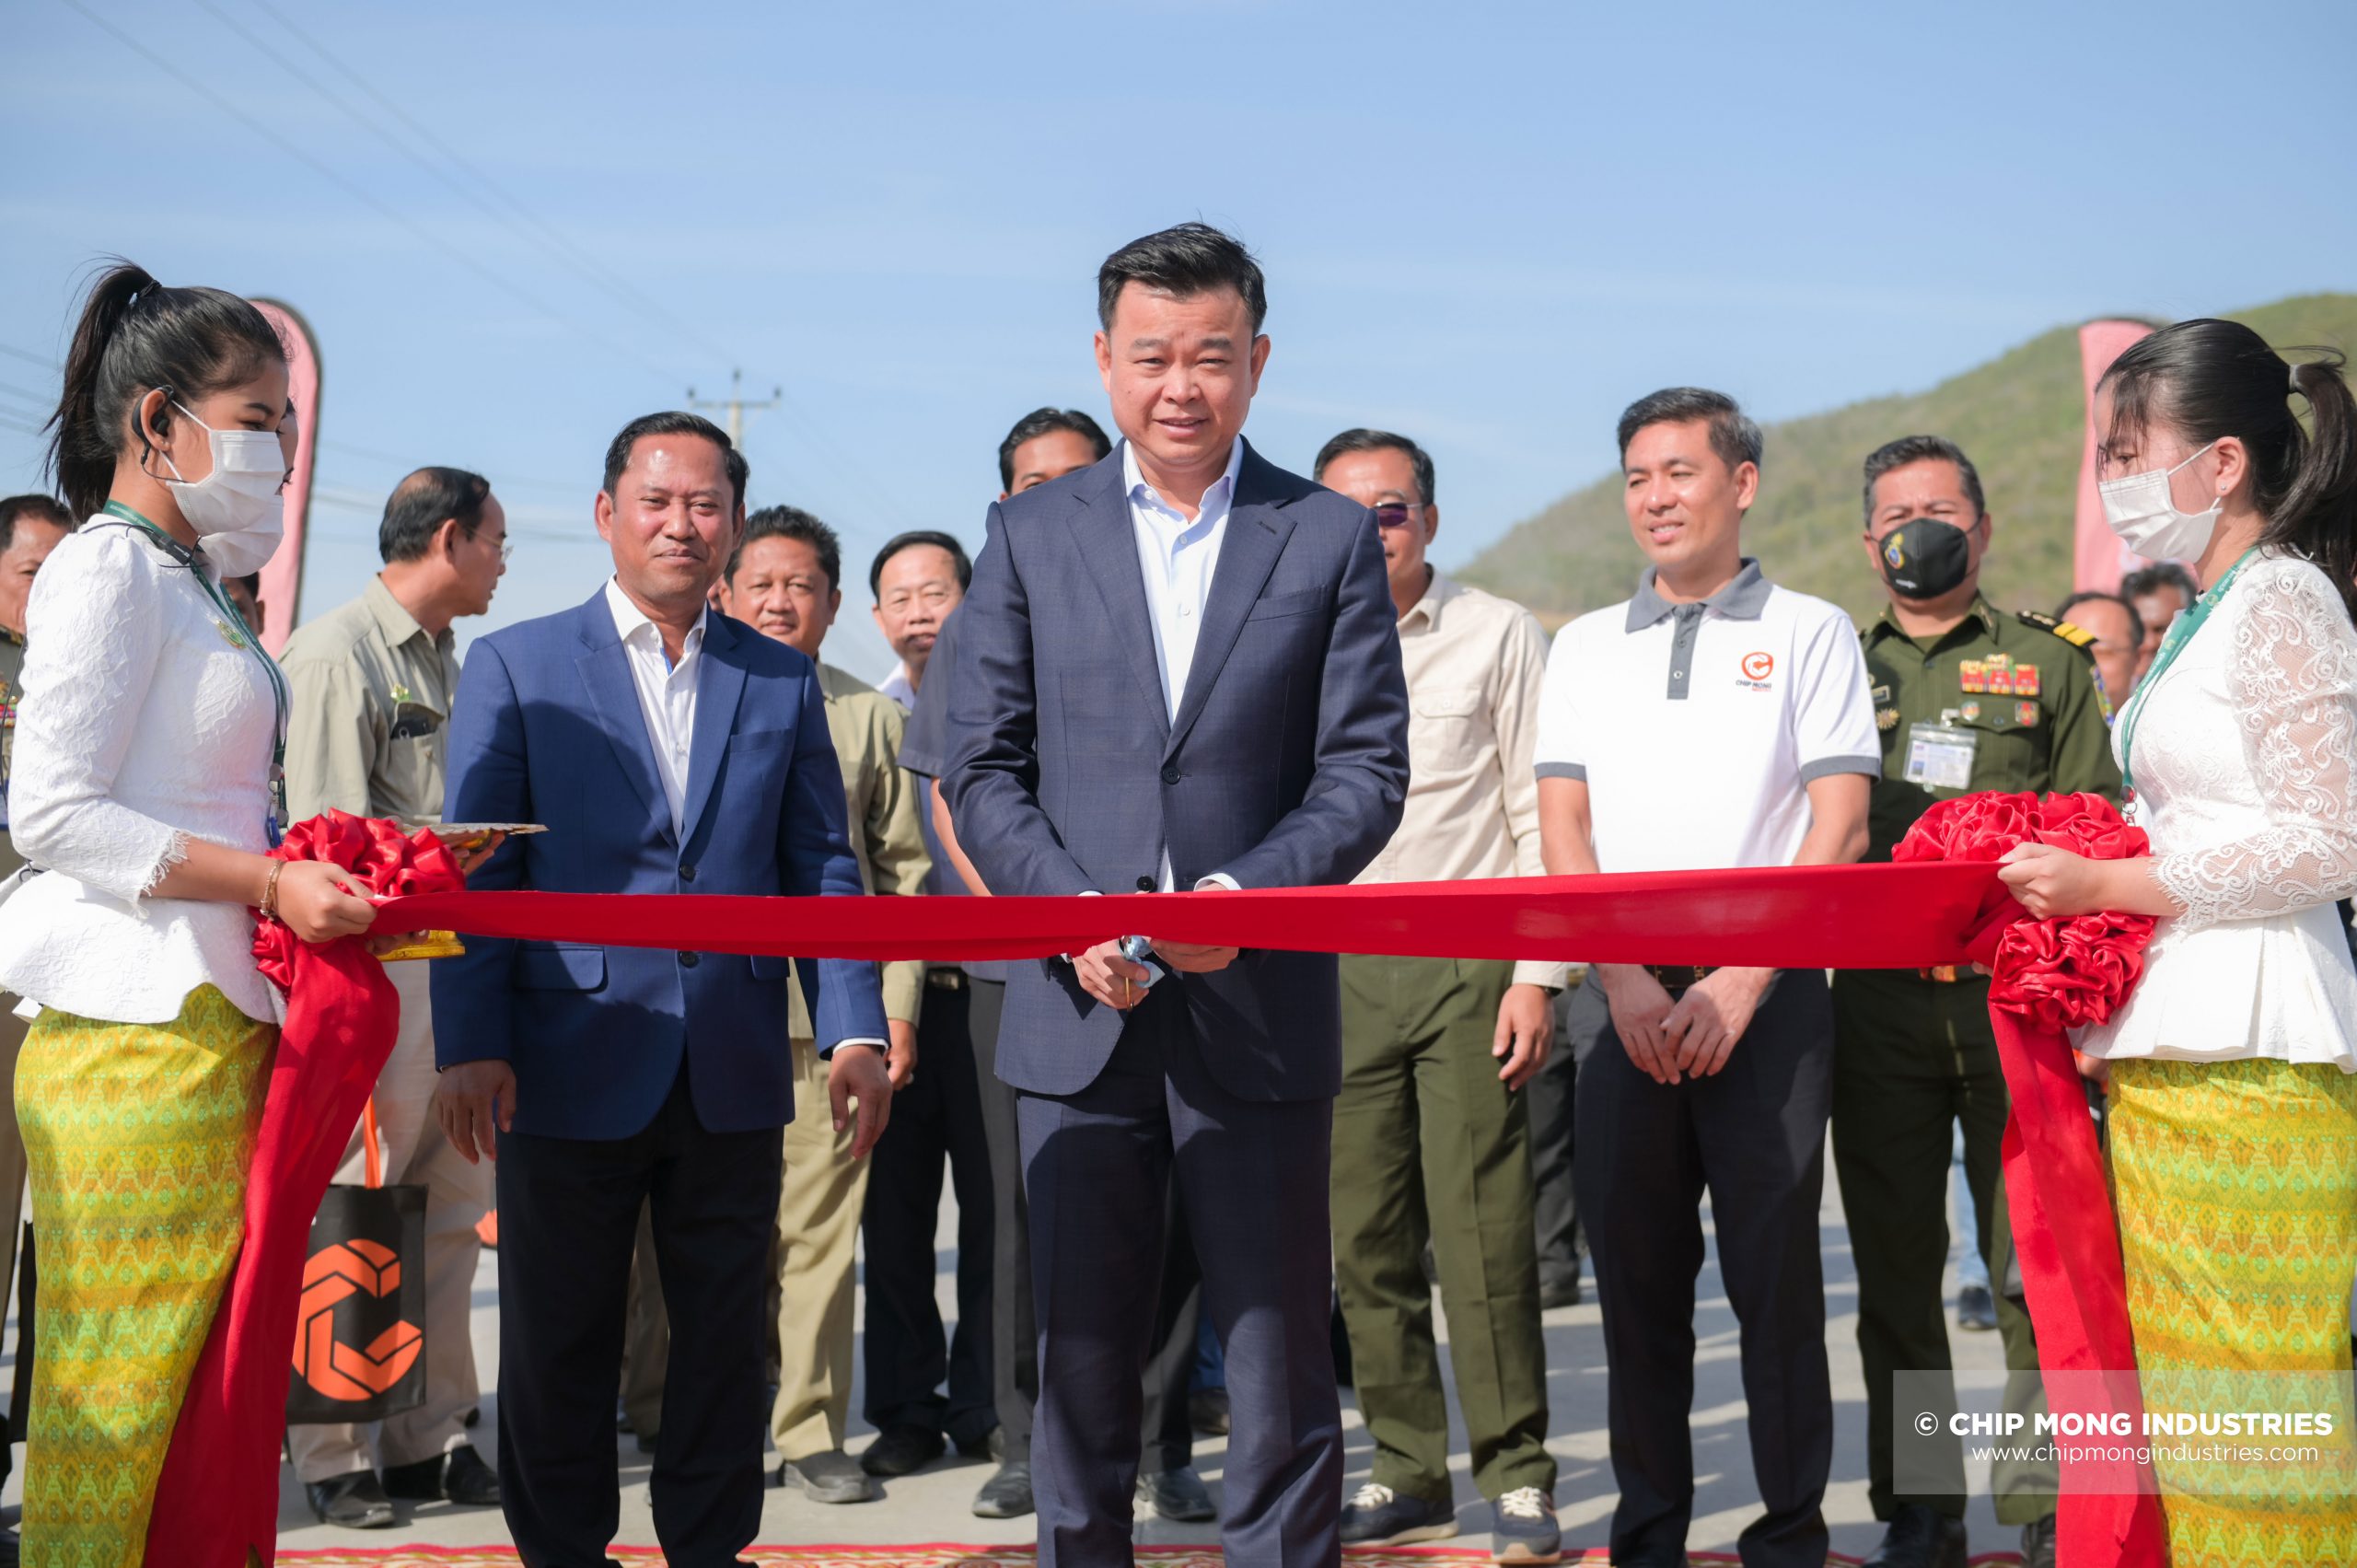 Chip Mong Industries Inaugurated A 2,100-meter-long Concrete Road